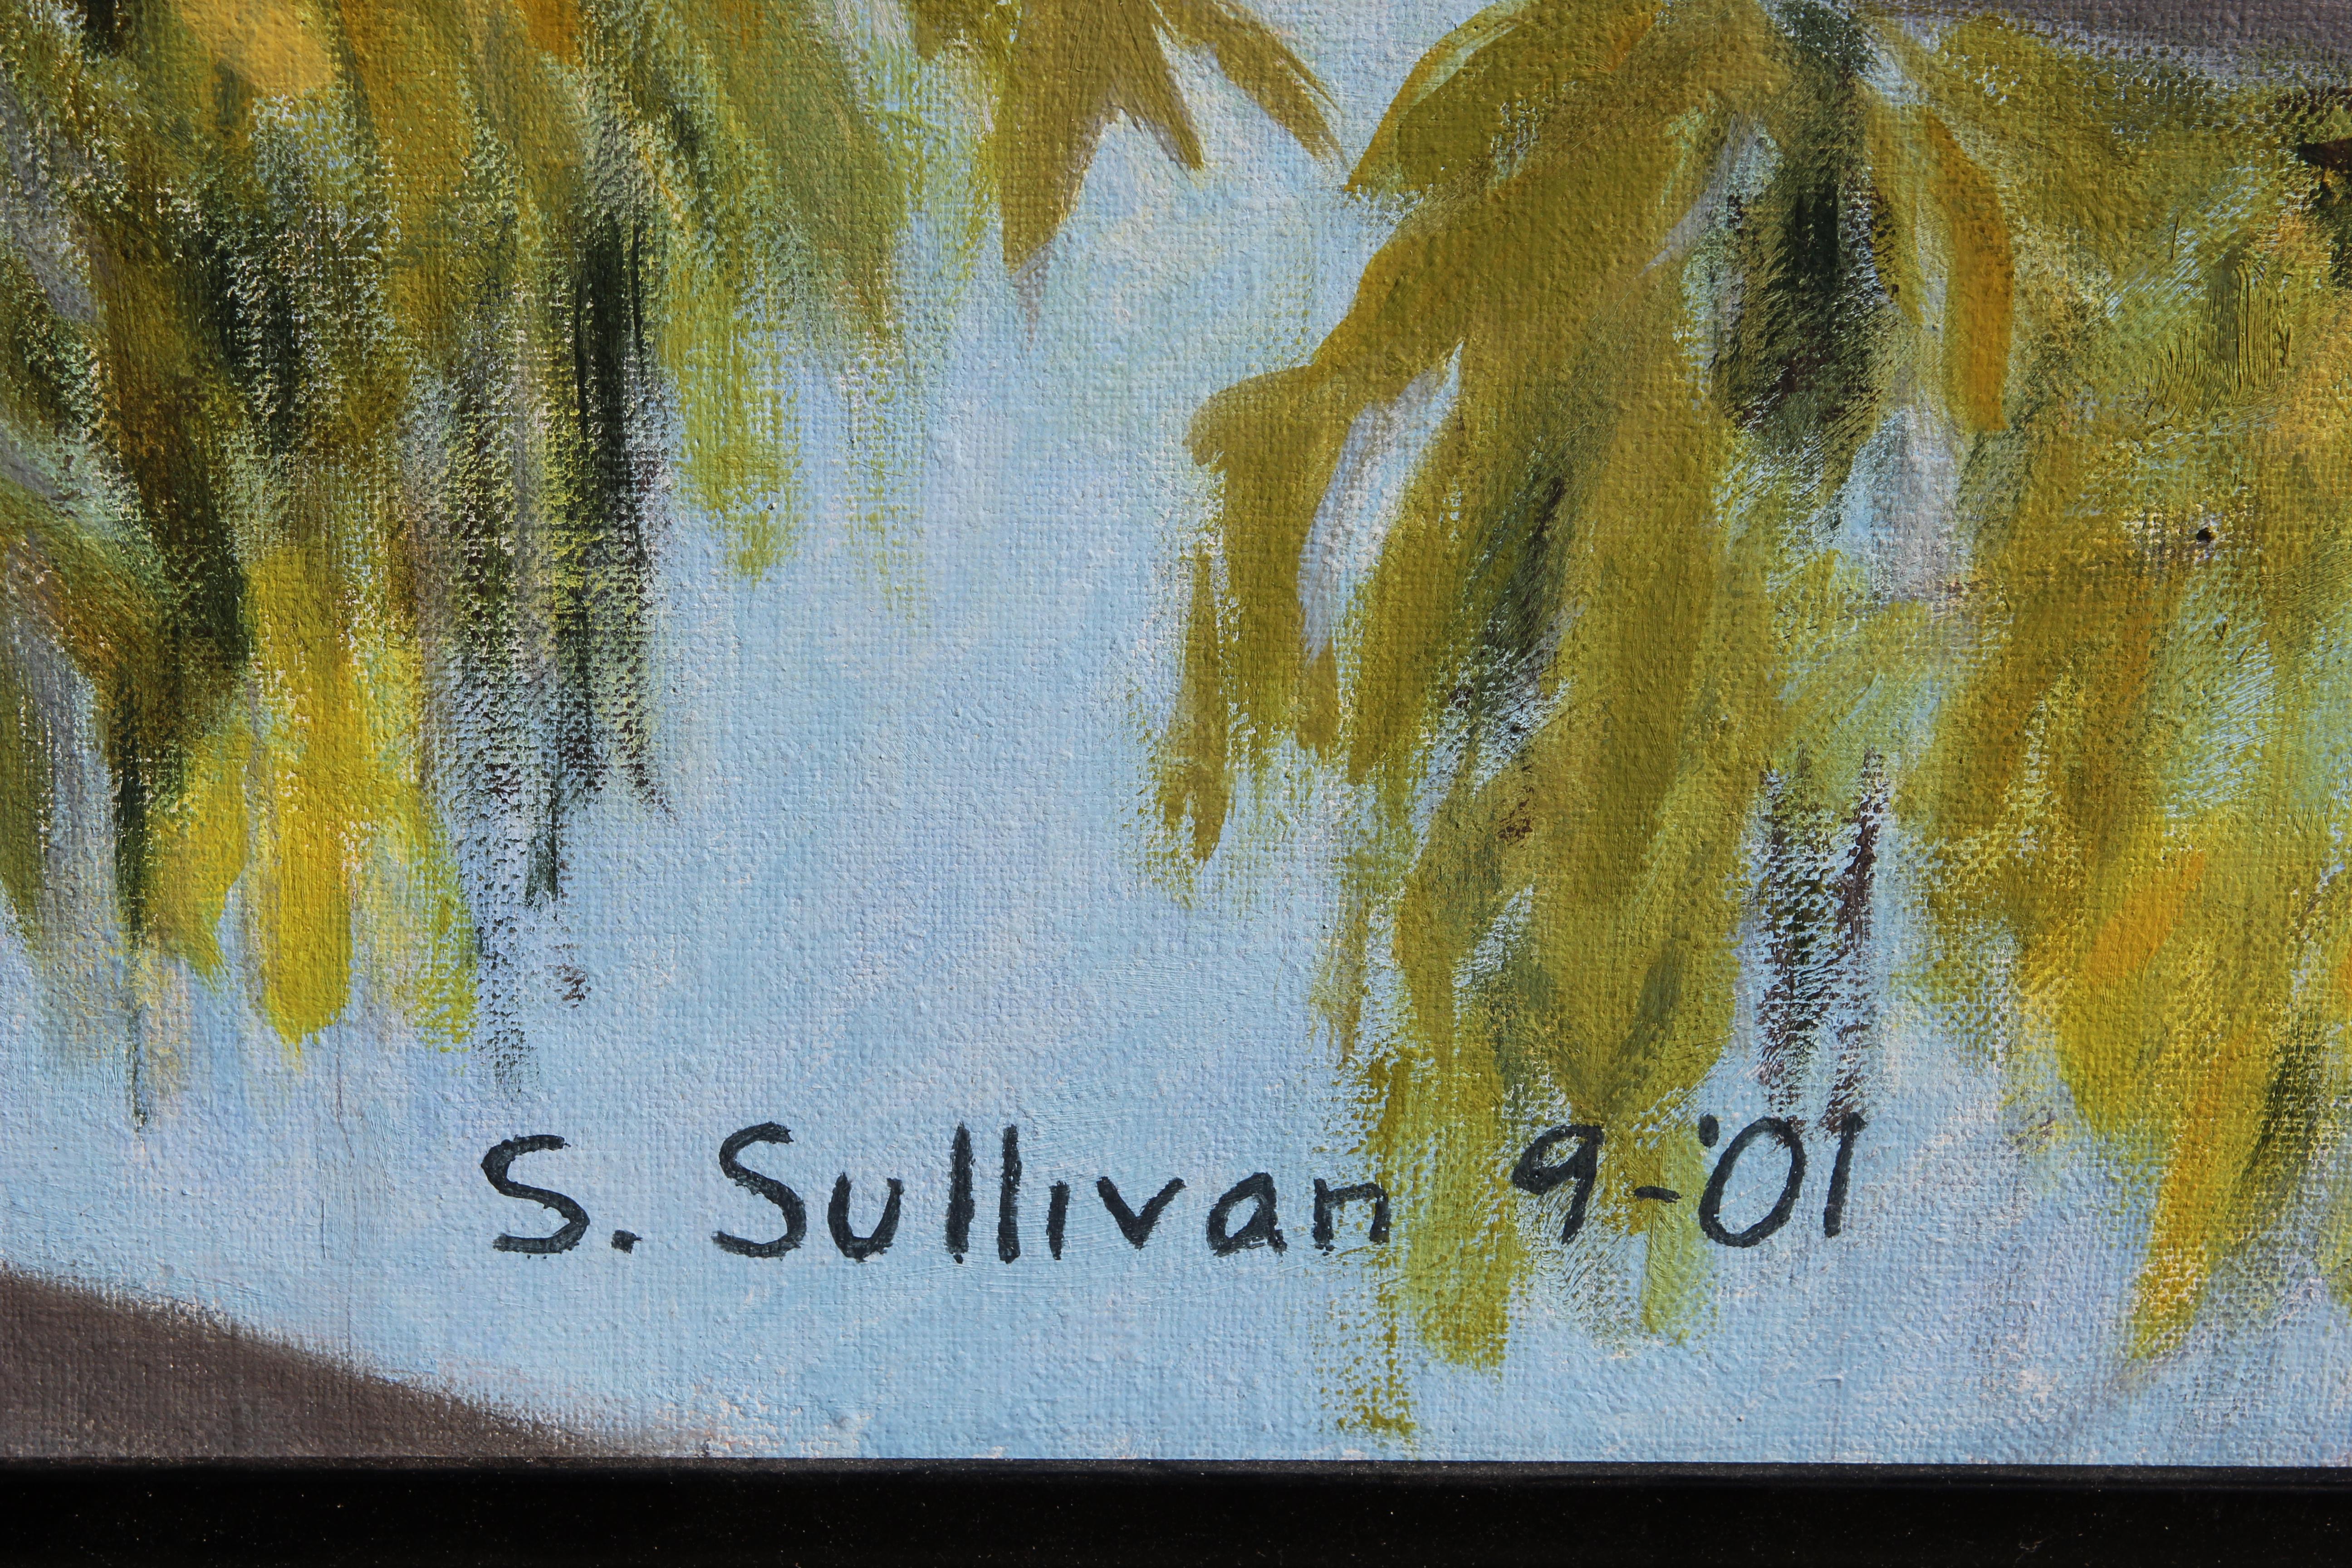 Untitled Naturalistic Texas Perspective Landscape  - Contemporary Painting by Stella Sullivan